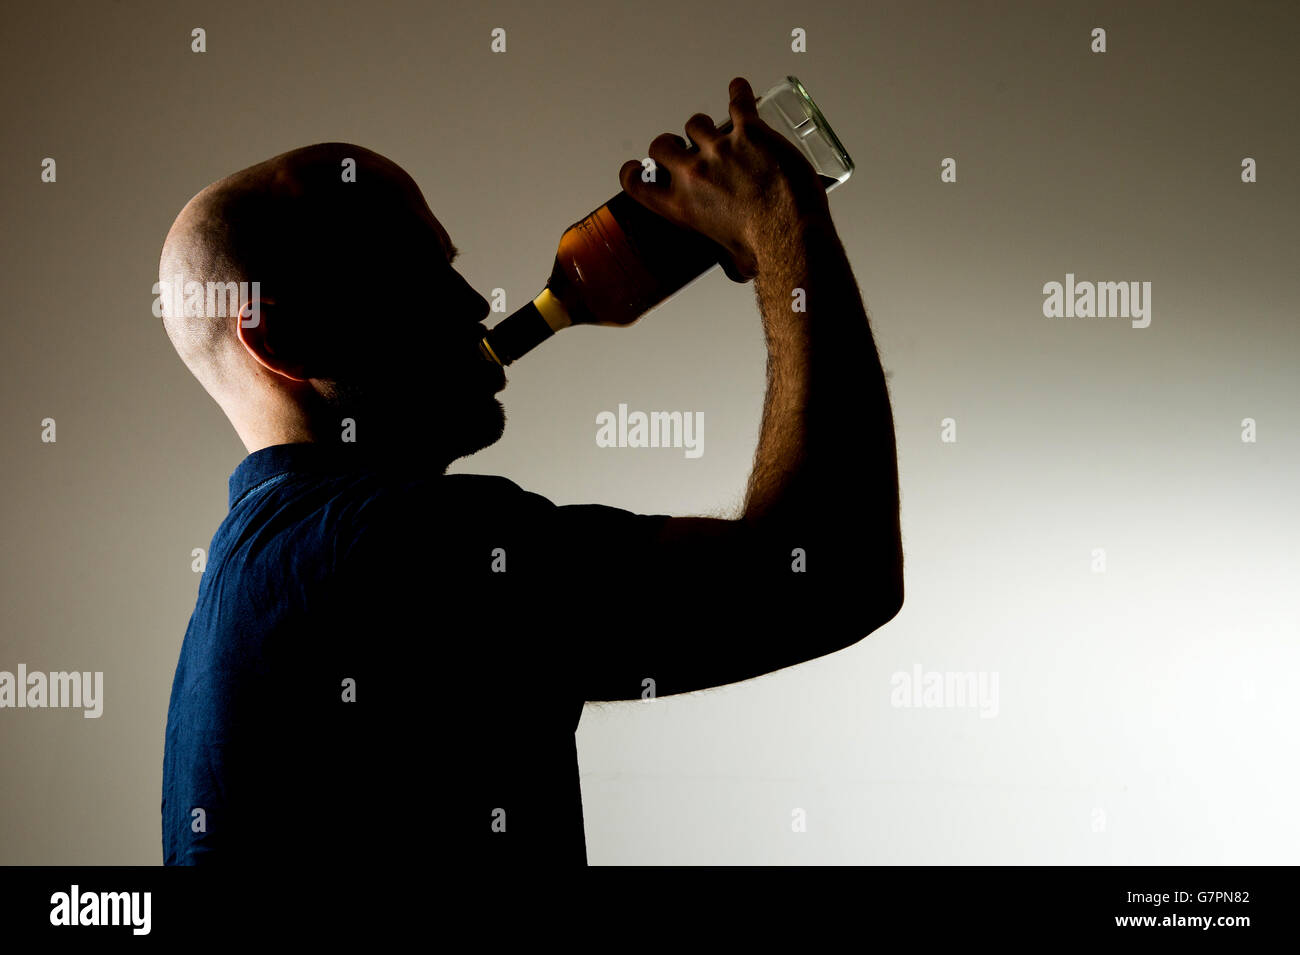 PICTURE POSED BY MODEL A man drinking alcohol. Stock Photo